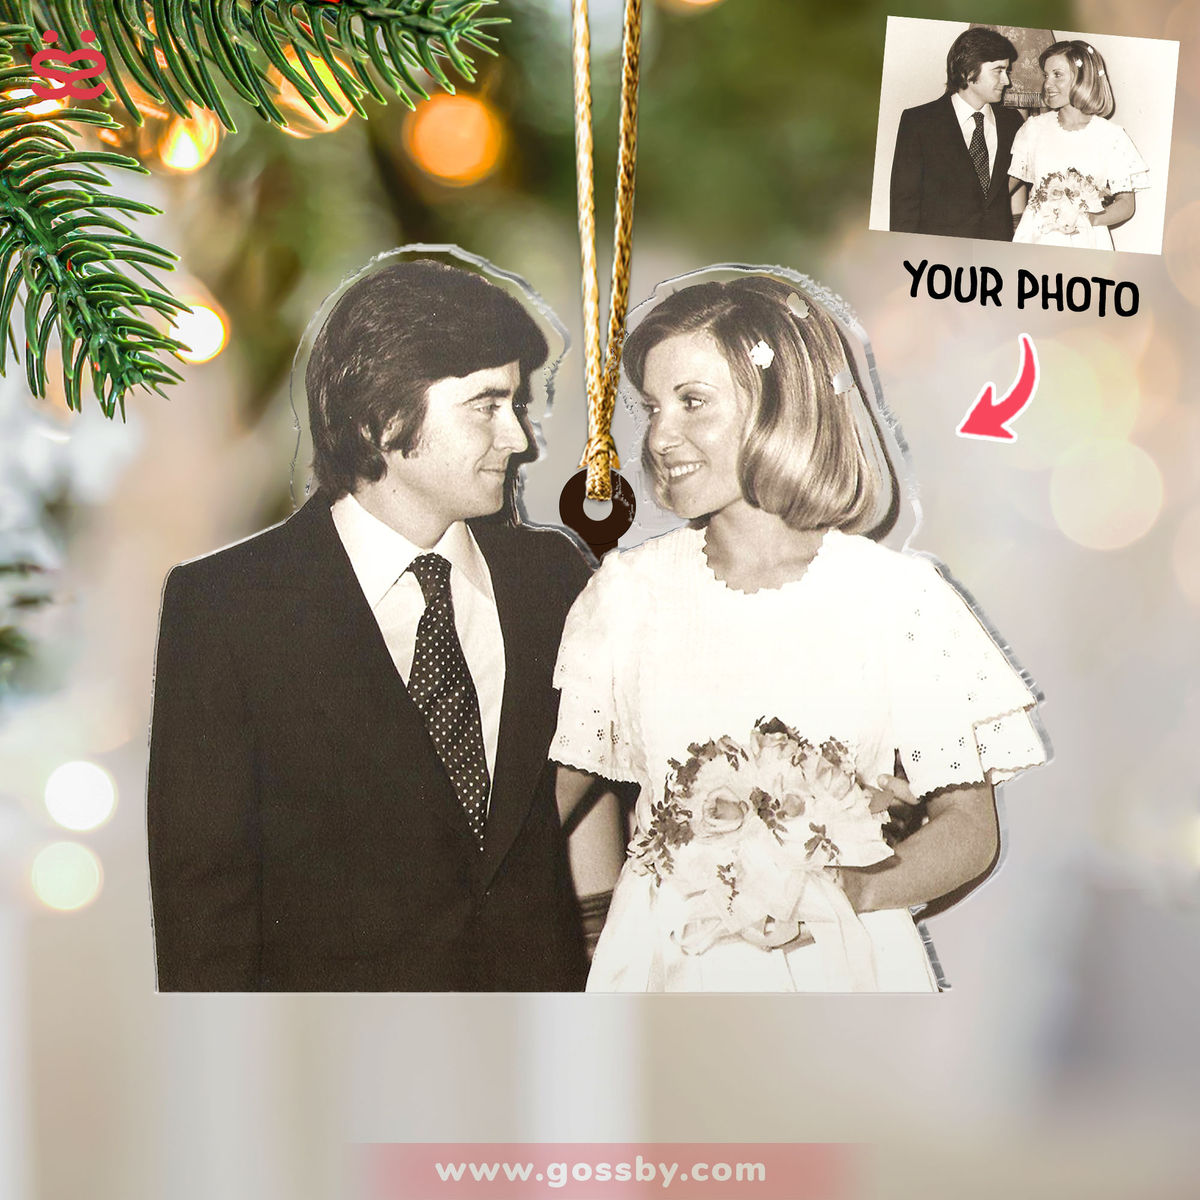 Photo Background Removal - Customized Your Photo Ornaments - Gift for Women - Christmas Gift - Couple Photo Gifts, Christmas Gifts for Couple